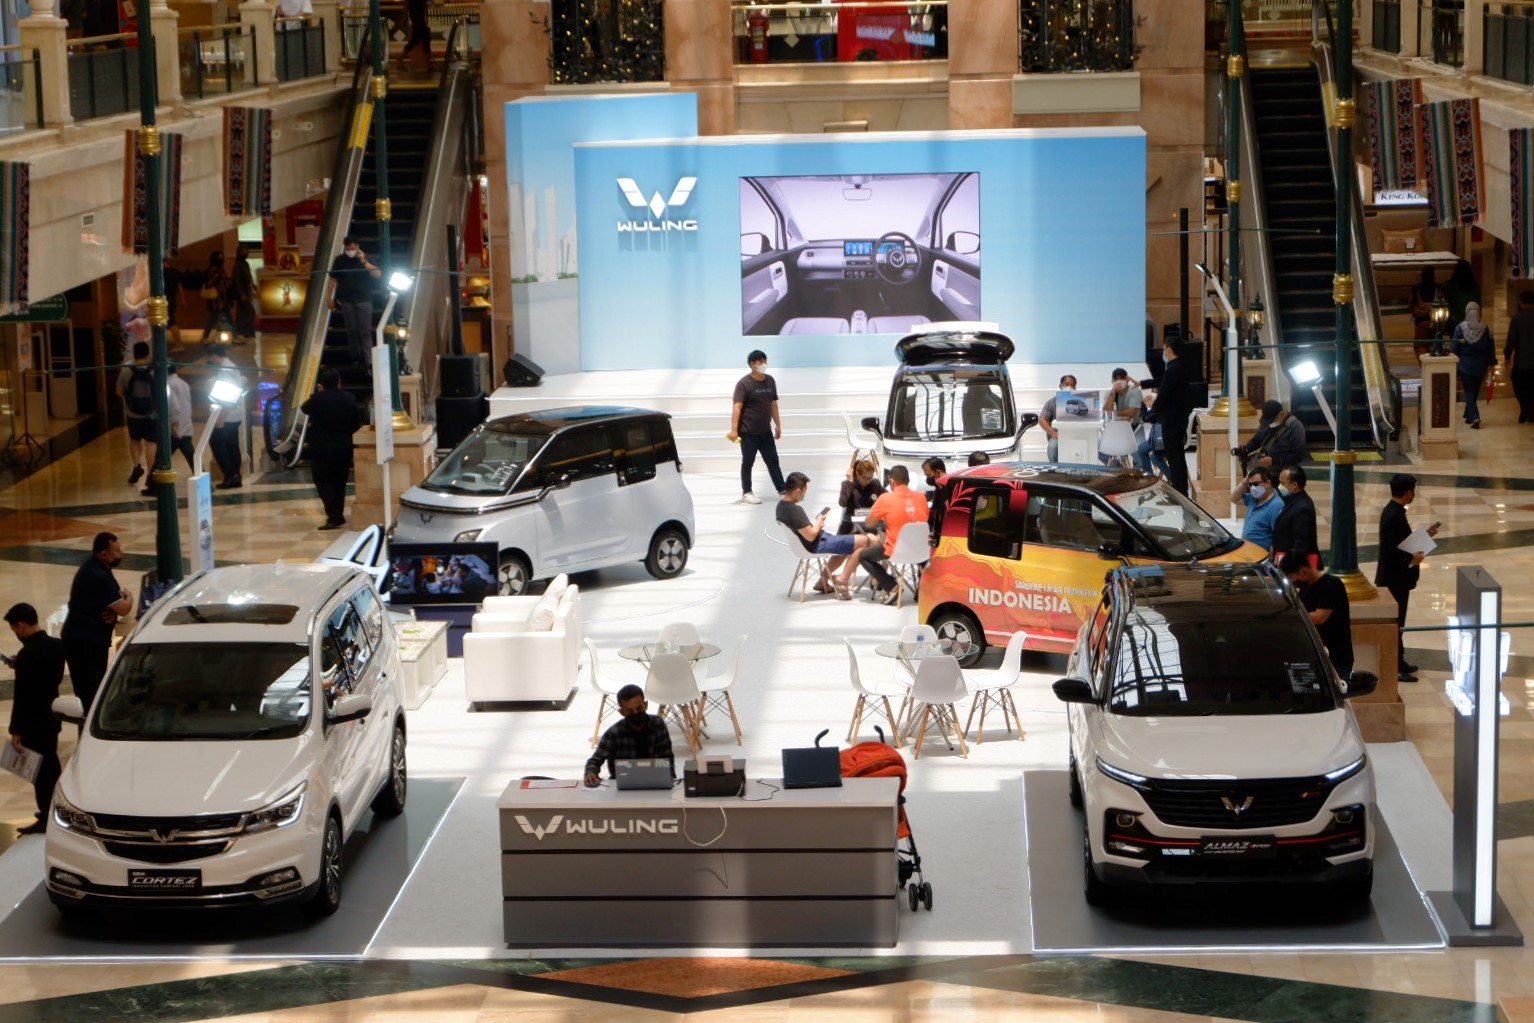 Image Wuling Air ev Greets the People of the Capital City Jakarta at Puri Indah Mall